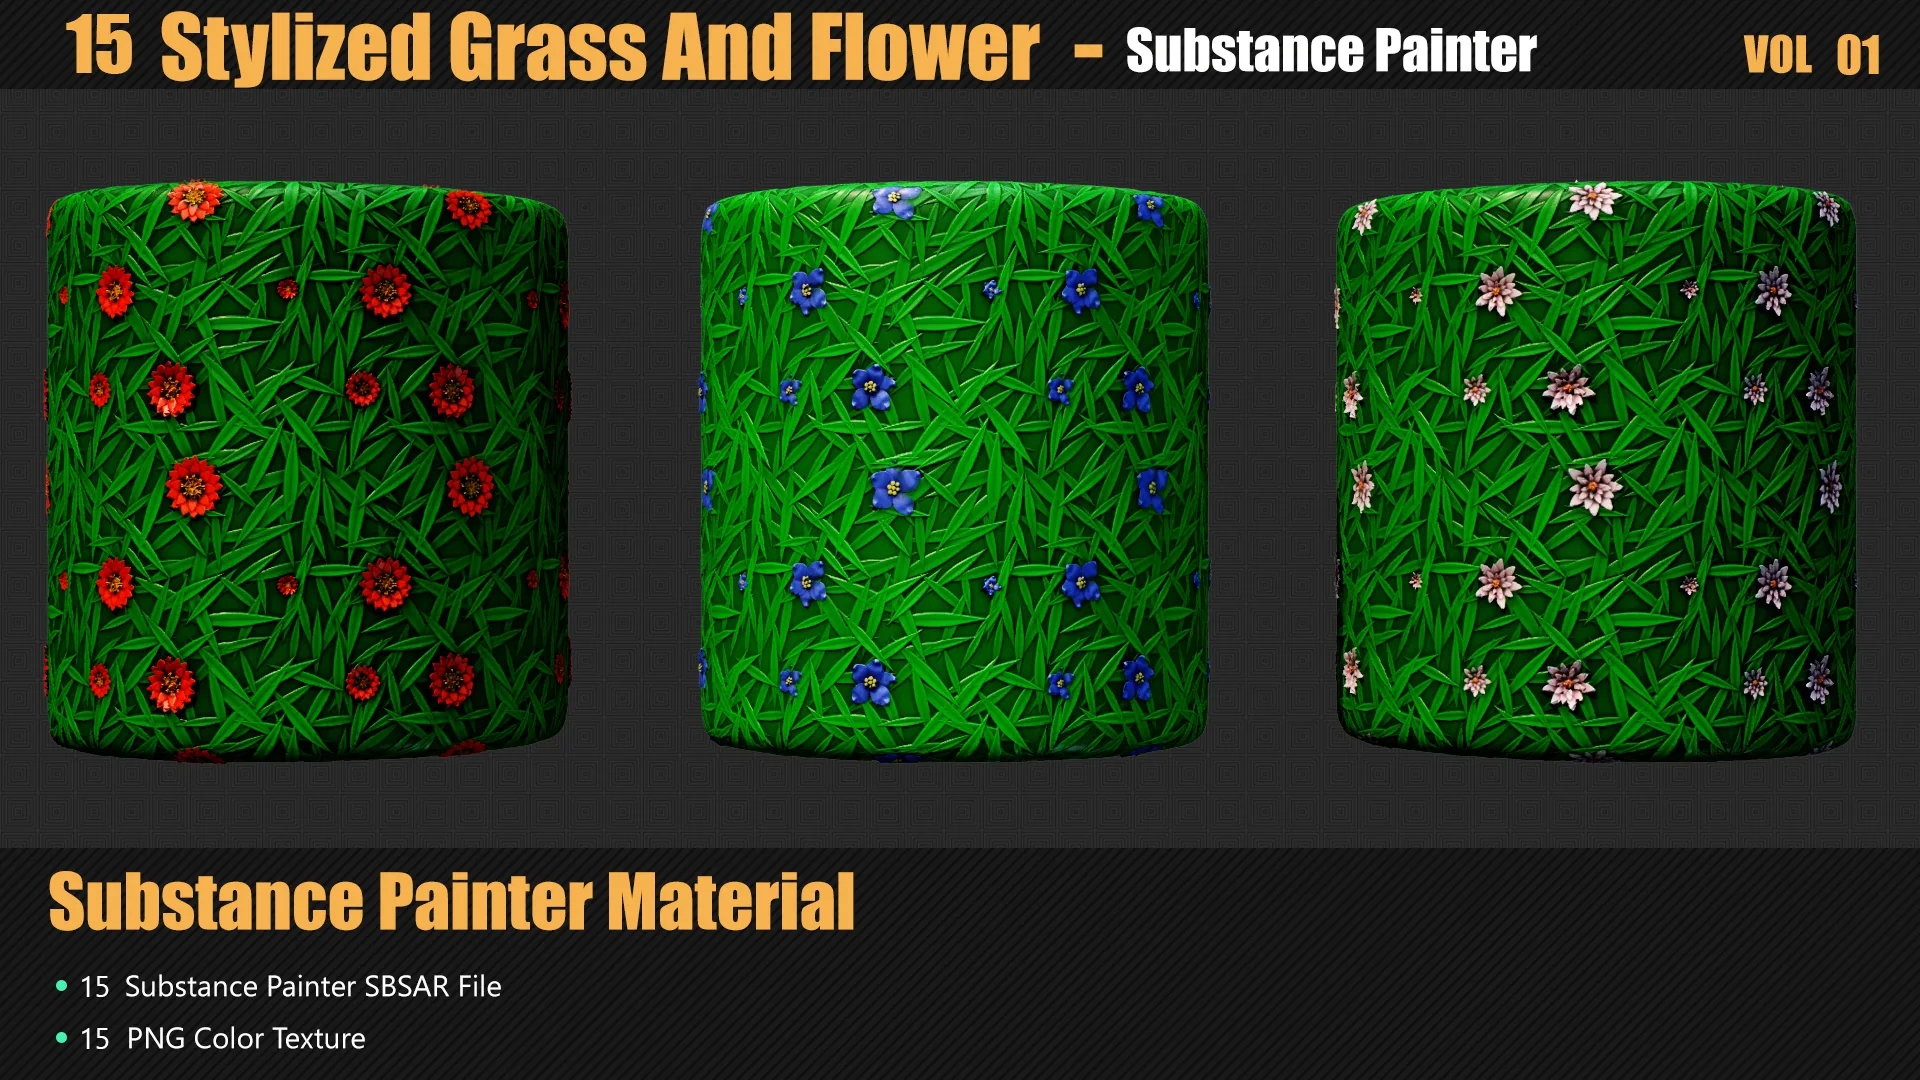 15 Stylized Grass And Flower Materials In Substance Painter